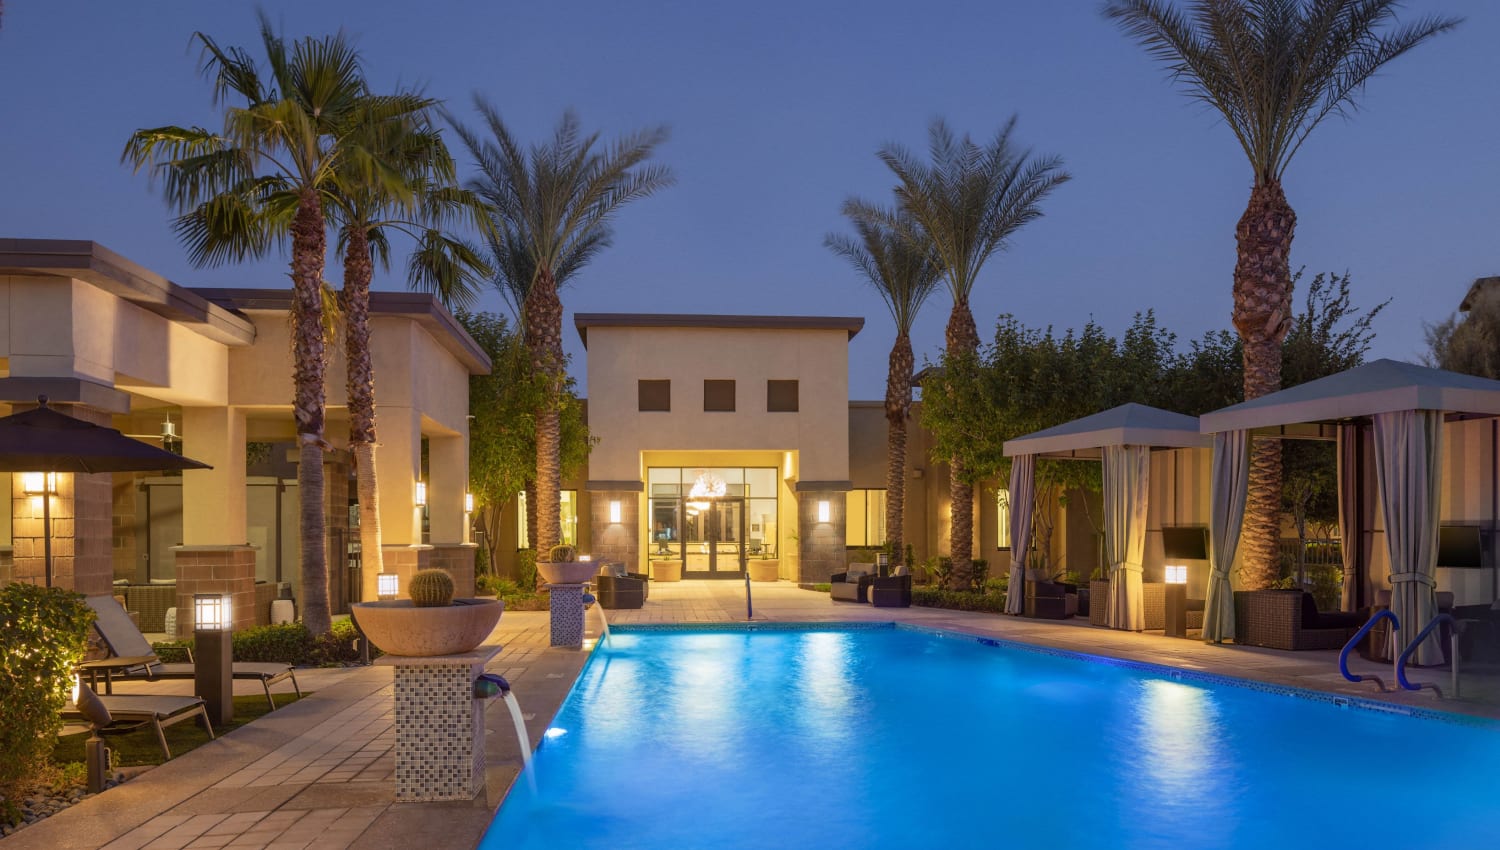 View of the outdoor pool during dusk at Cadia Crossing in Gilbert, Arizona